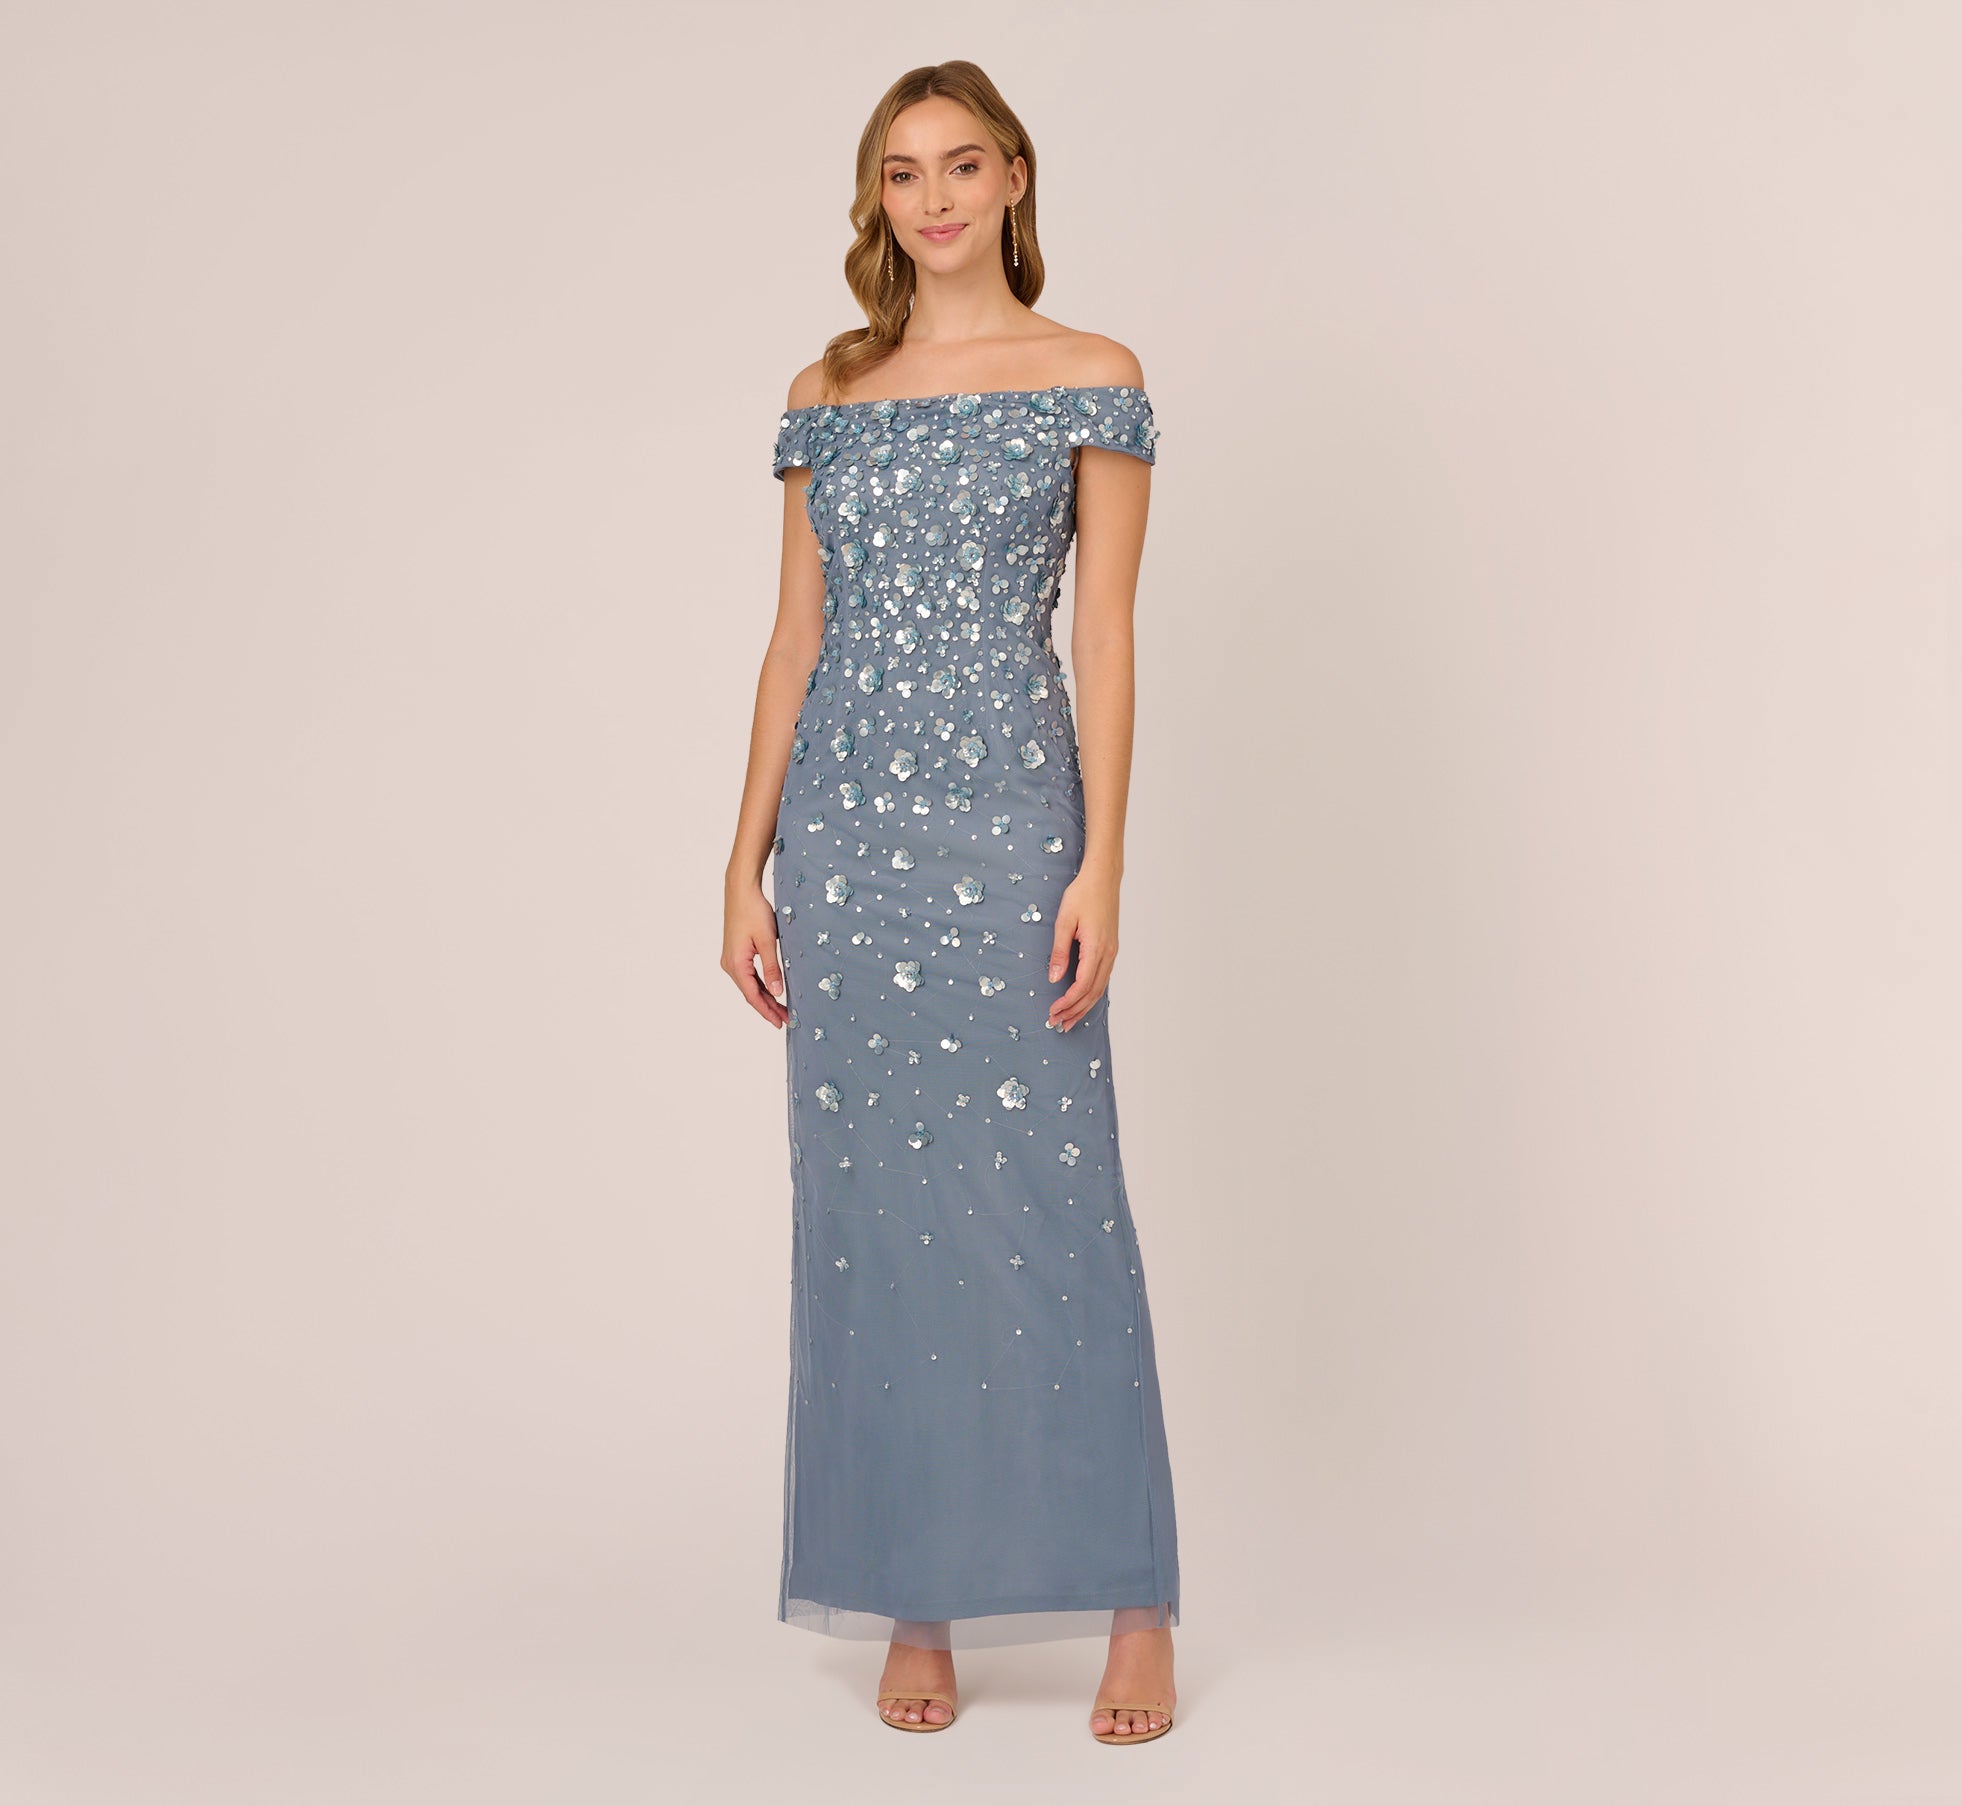 Women's Adrianna Papell Formal Dresses & Evening Gowns | Nordstrom